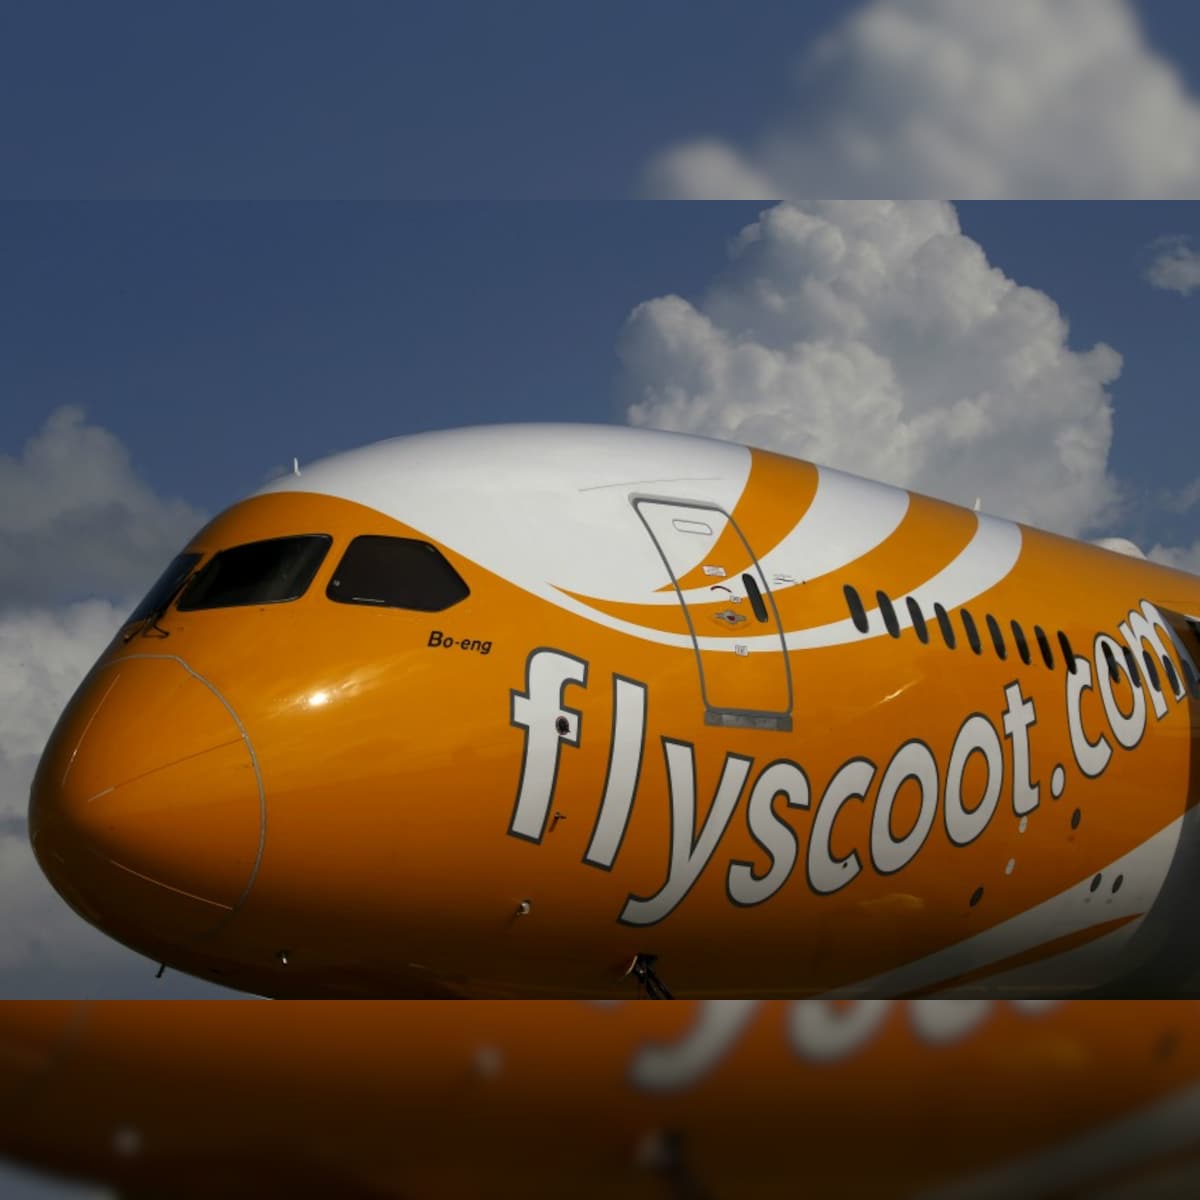 Scoot Airlines Dedicates 787 Dreamliner To India, Calls It Kamascootra